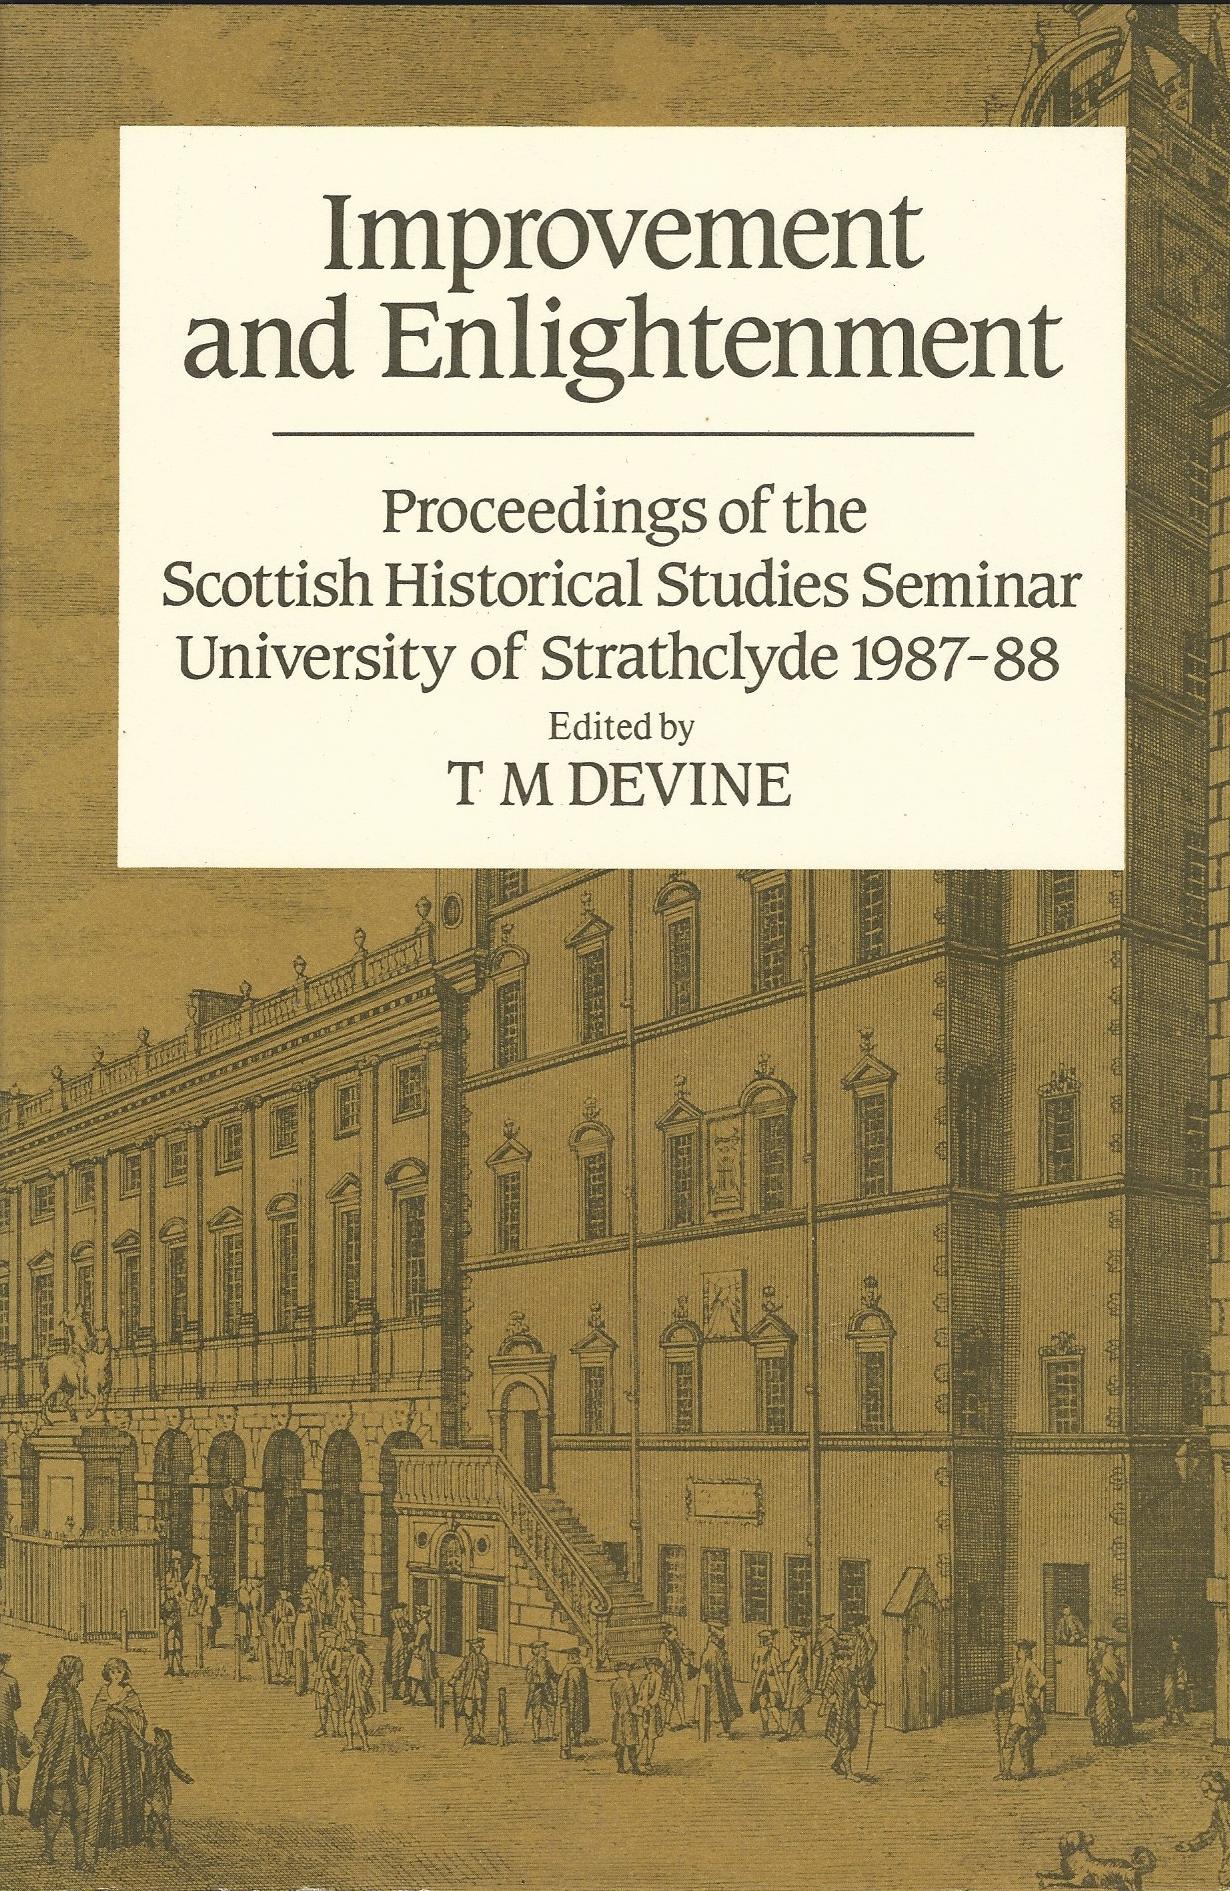 Image for Improvement and Enlightenment: Proceedings of the Scottish Historical Studies Seminar University of Strathclyde 1987-88